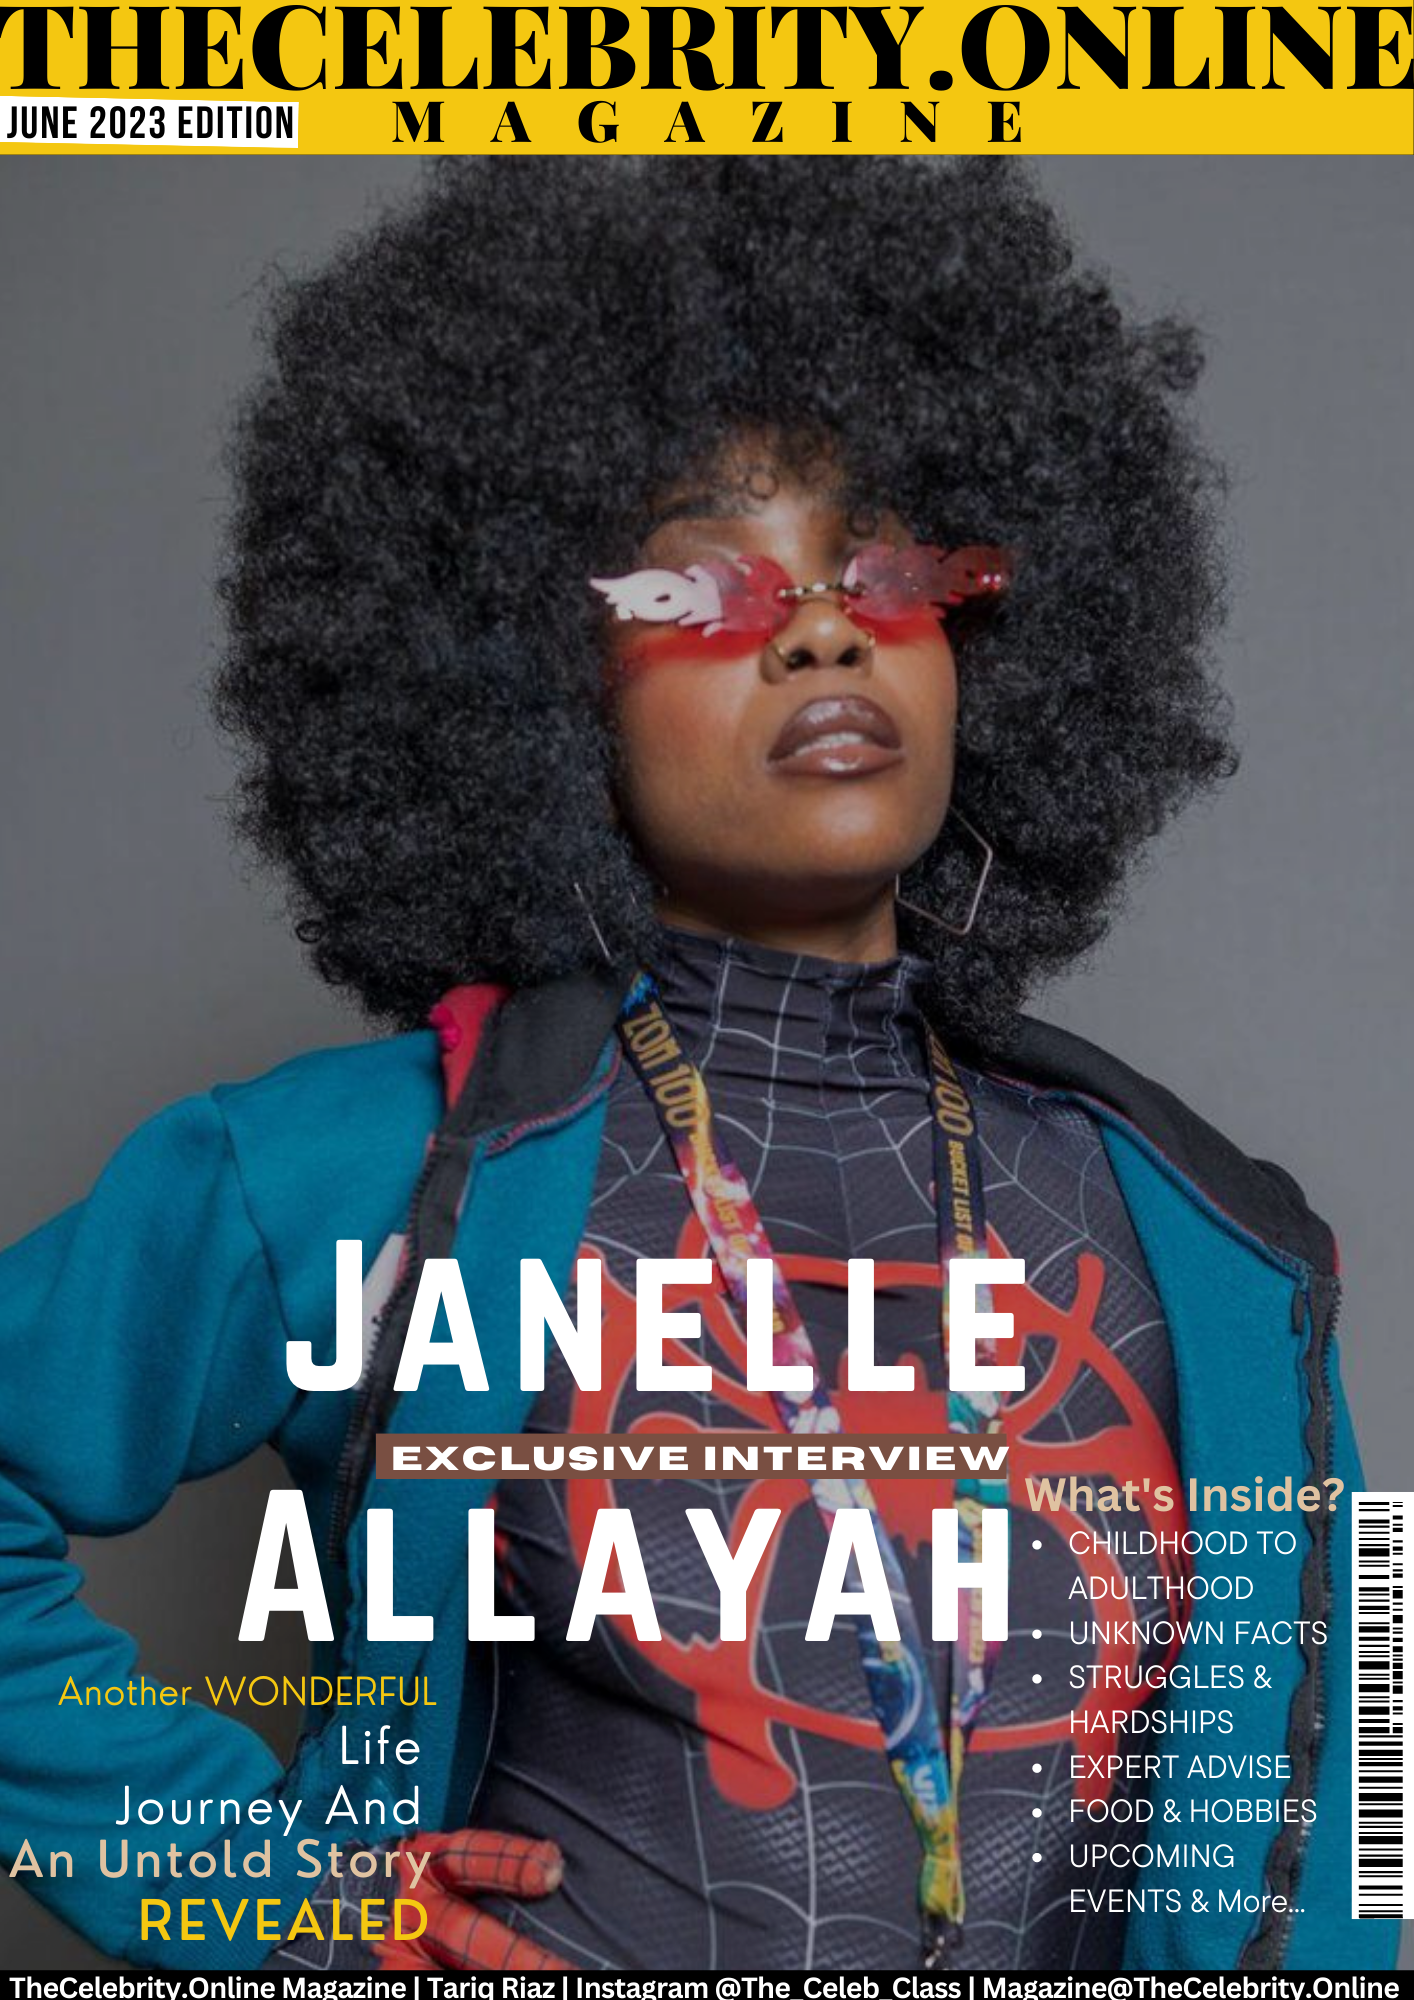 Janelle Allayah Exclusive Interview – ‘Keep Striving For Your Best With The Upmost Confidence’